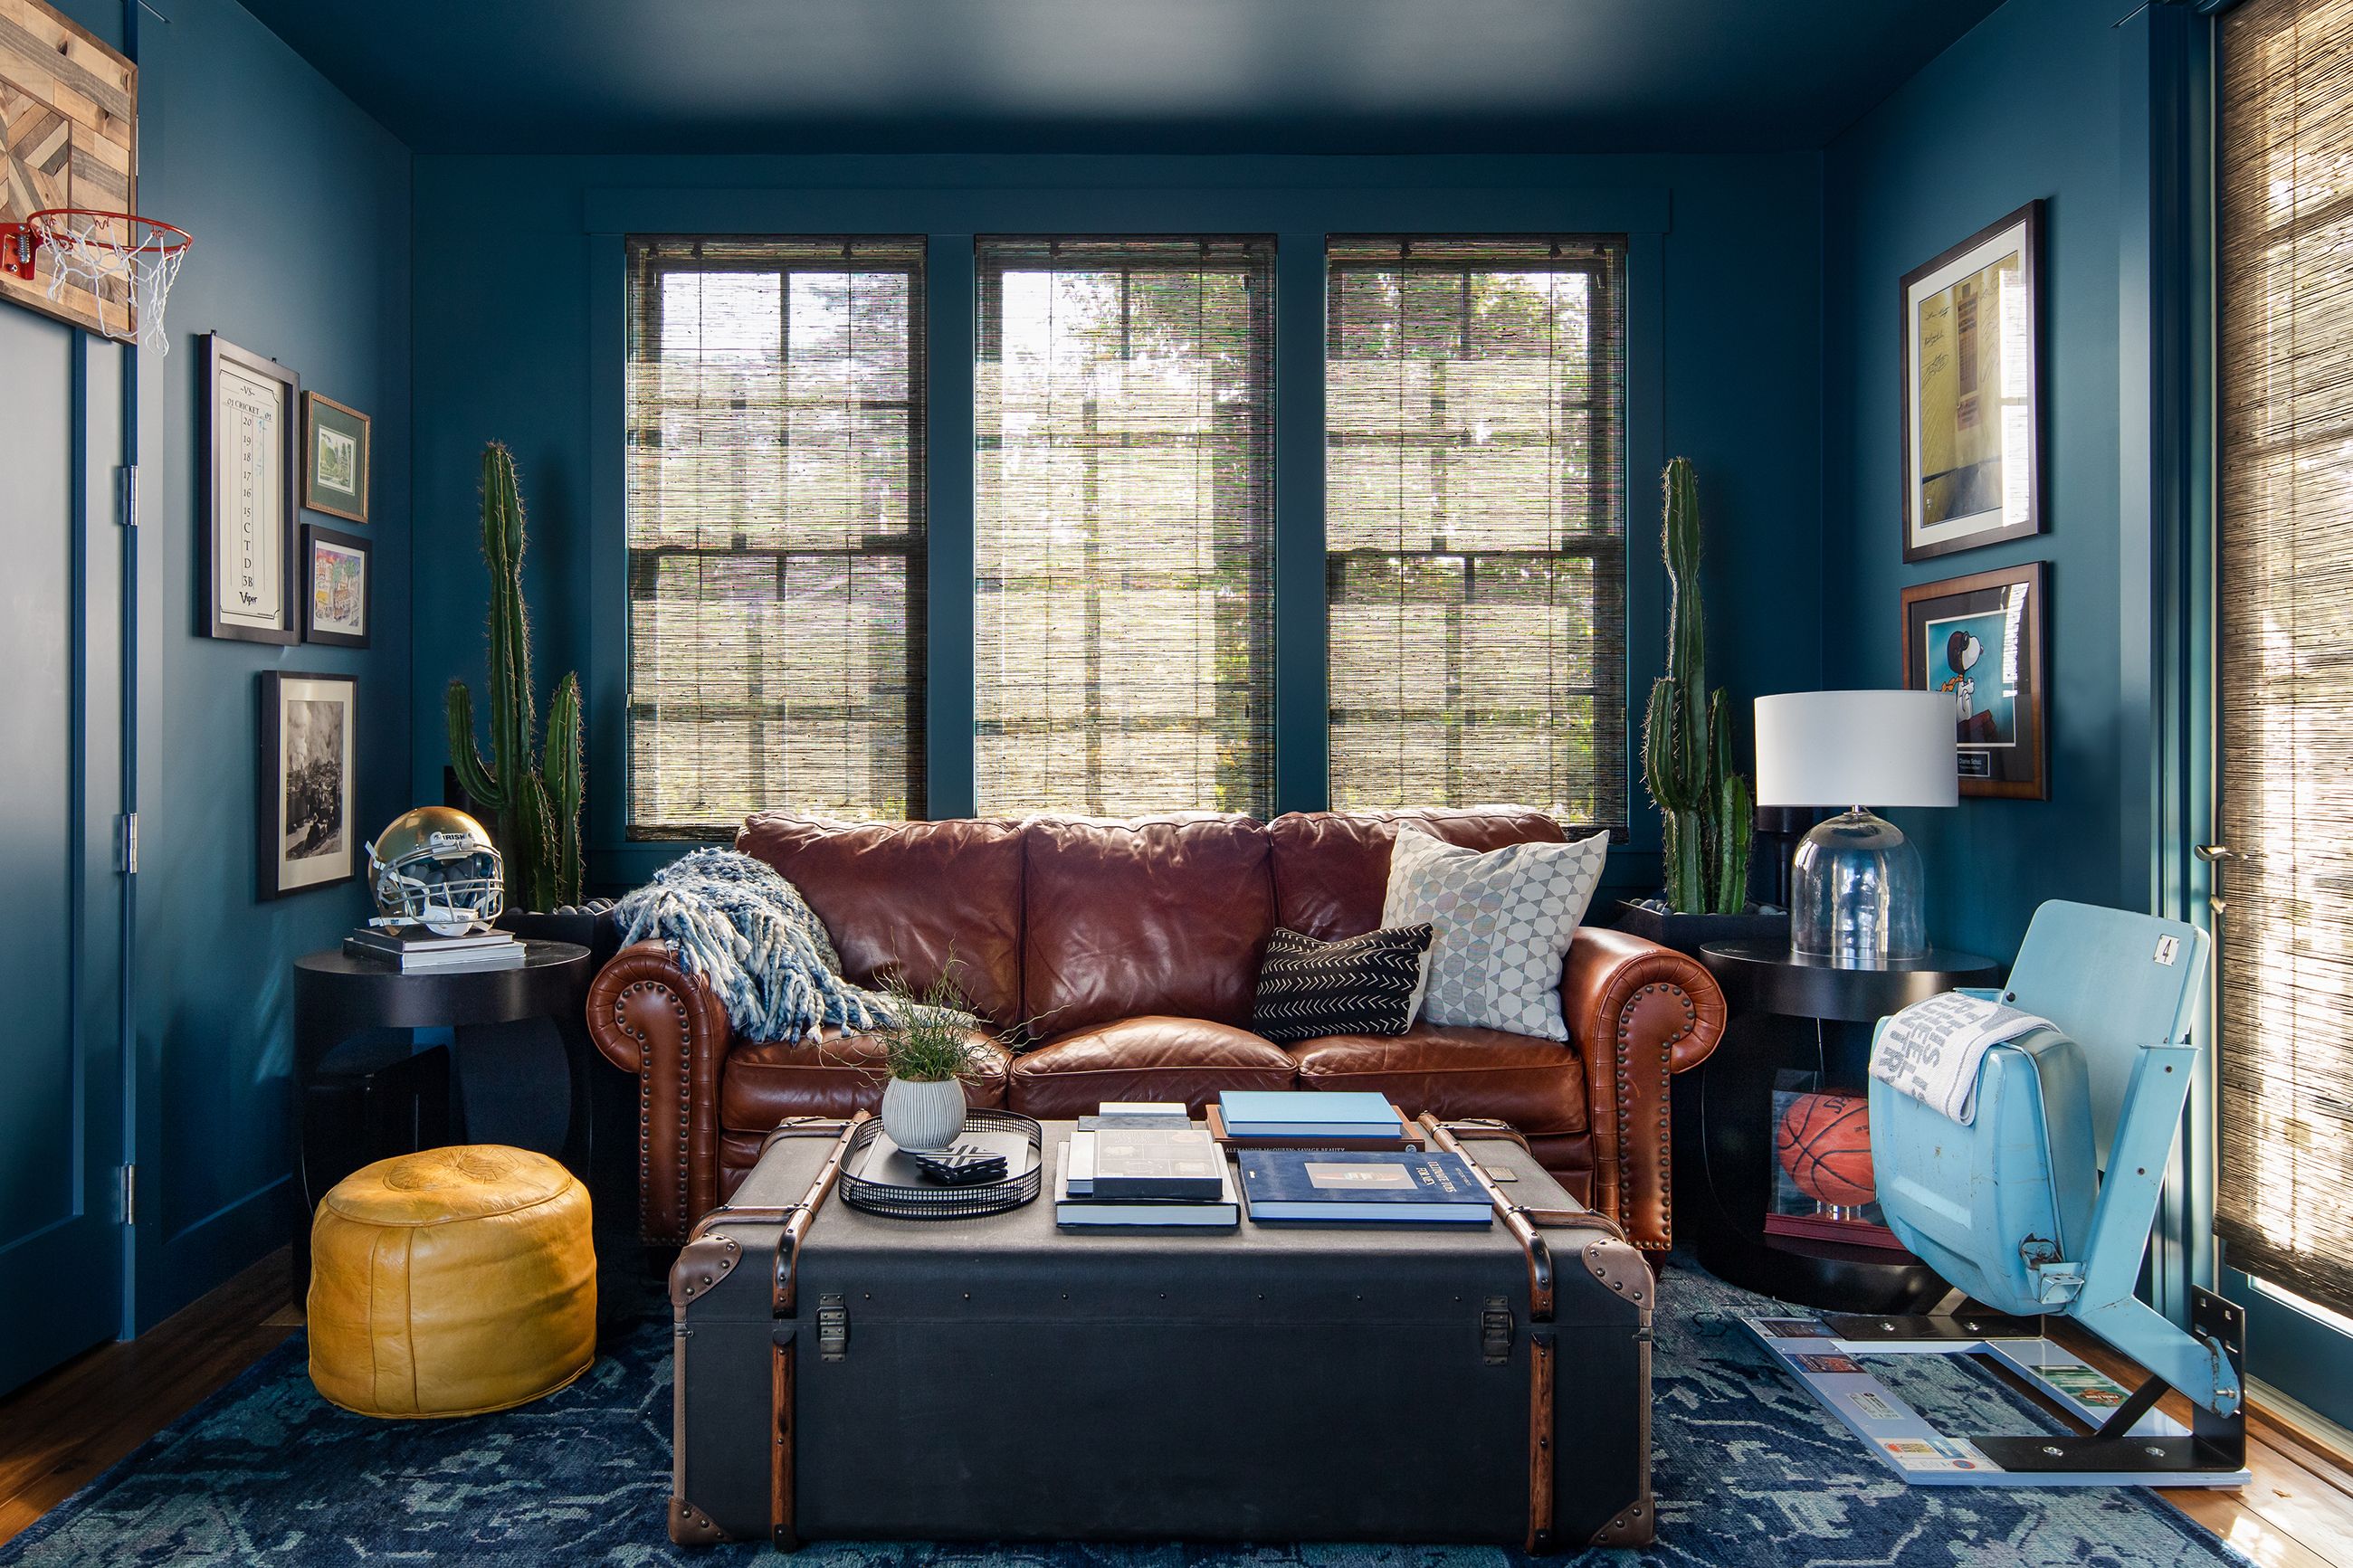 2021 Paint Color Trends, Top Paint Colors For Living Room 2021